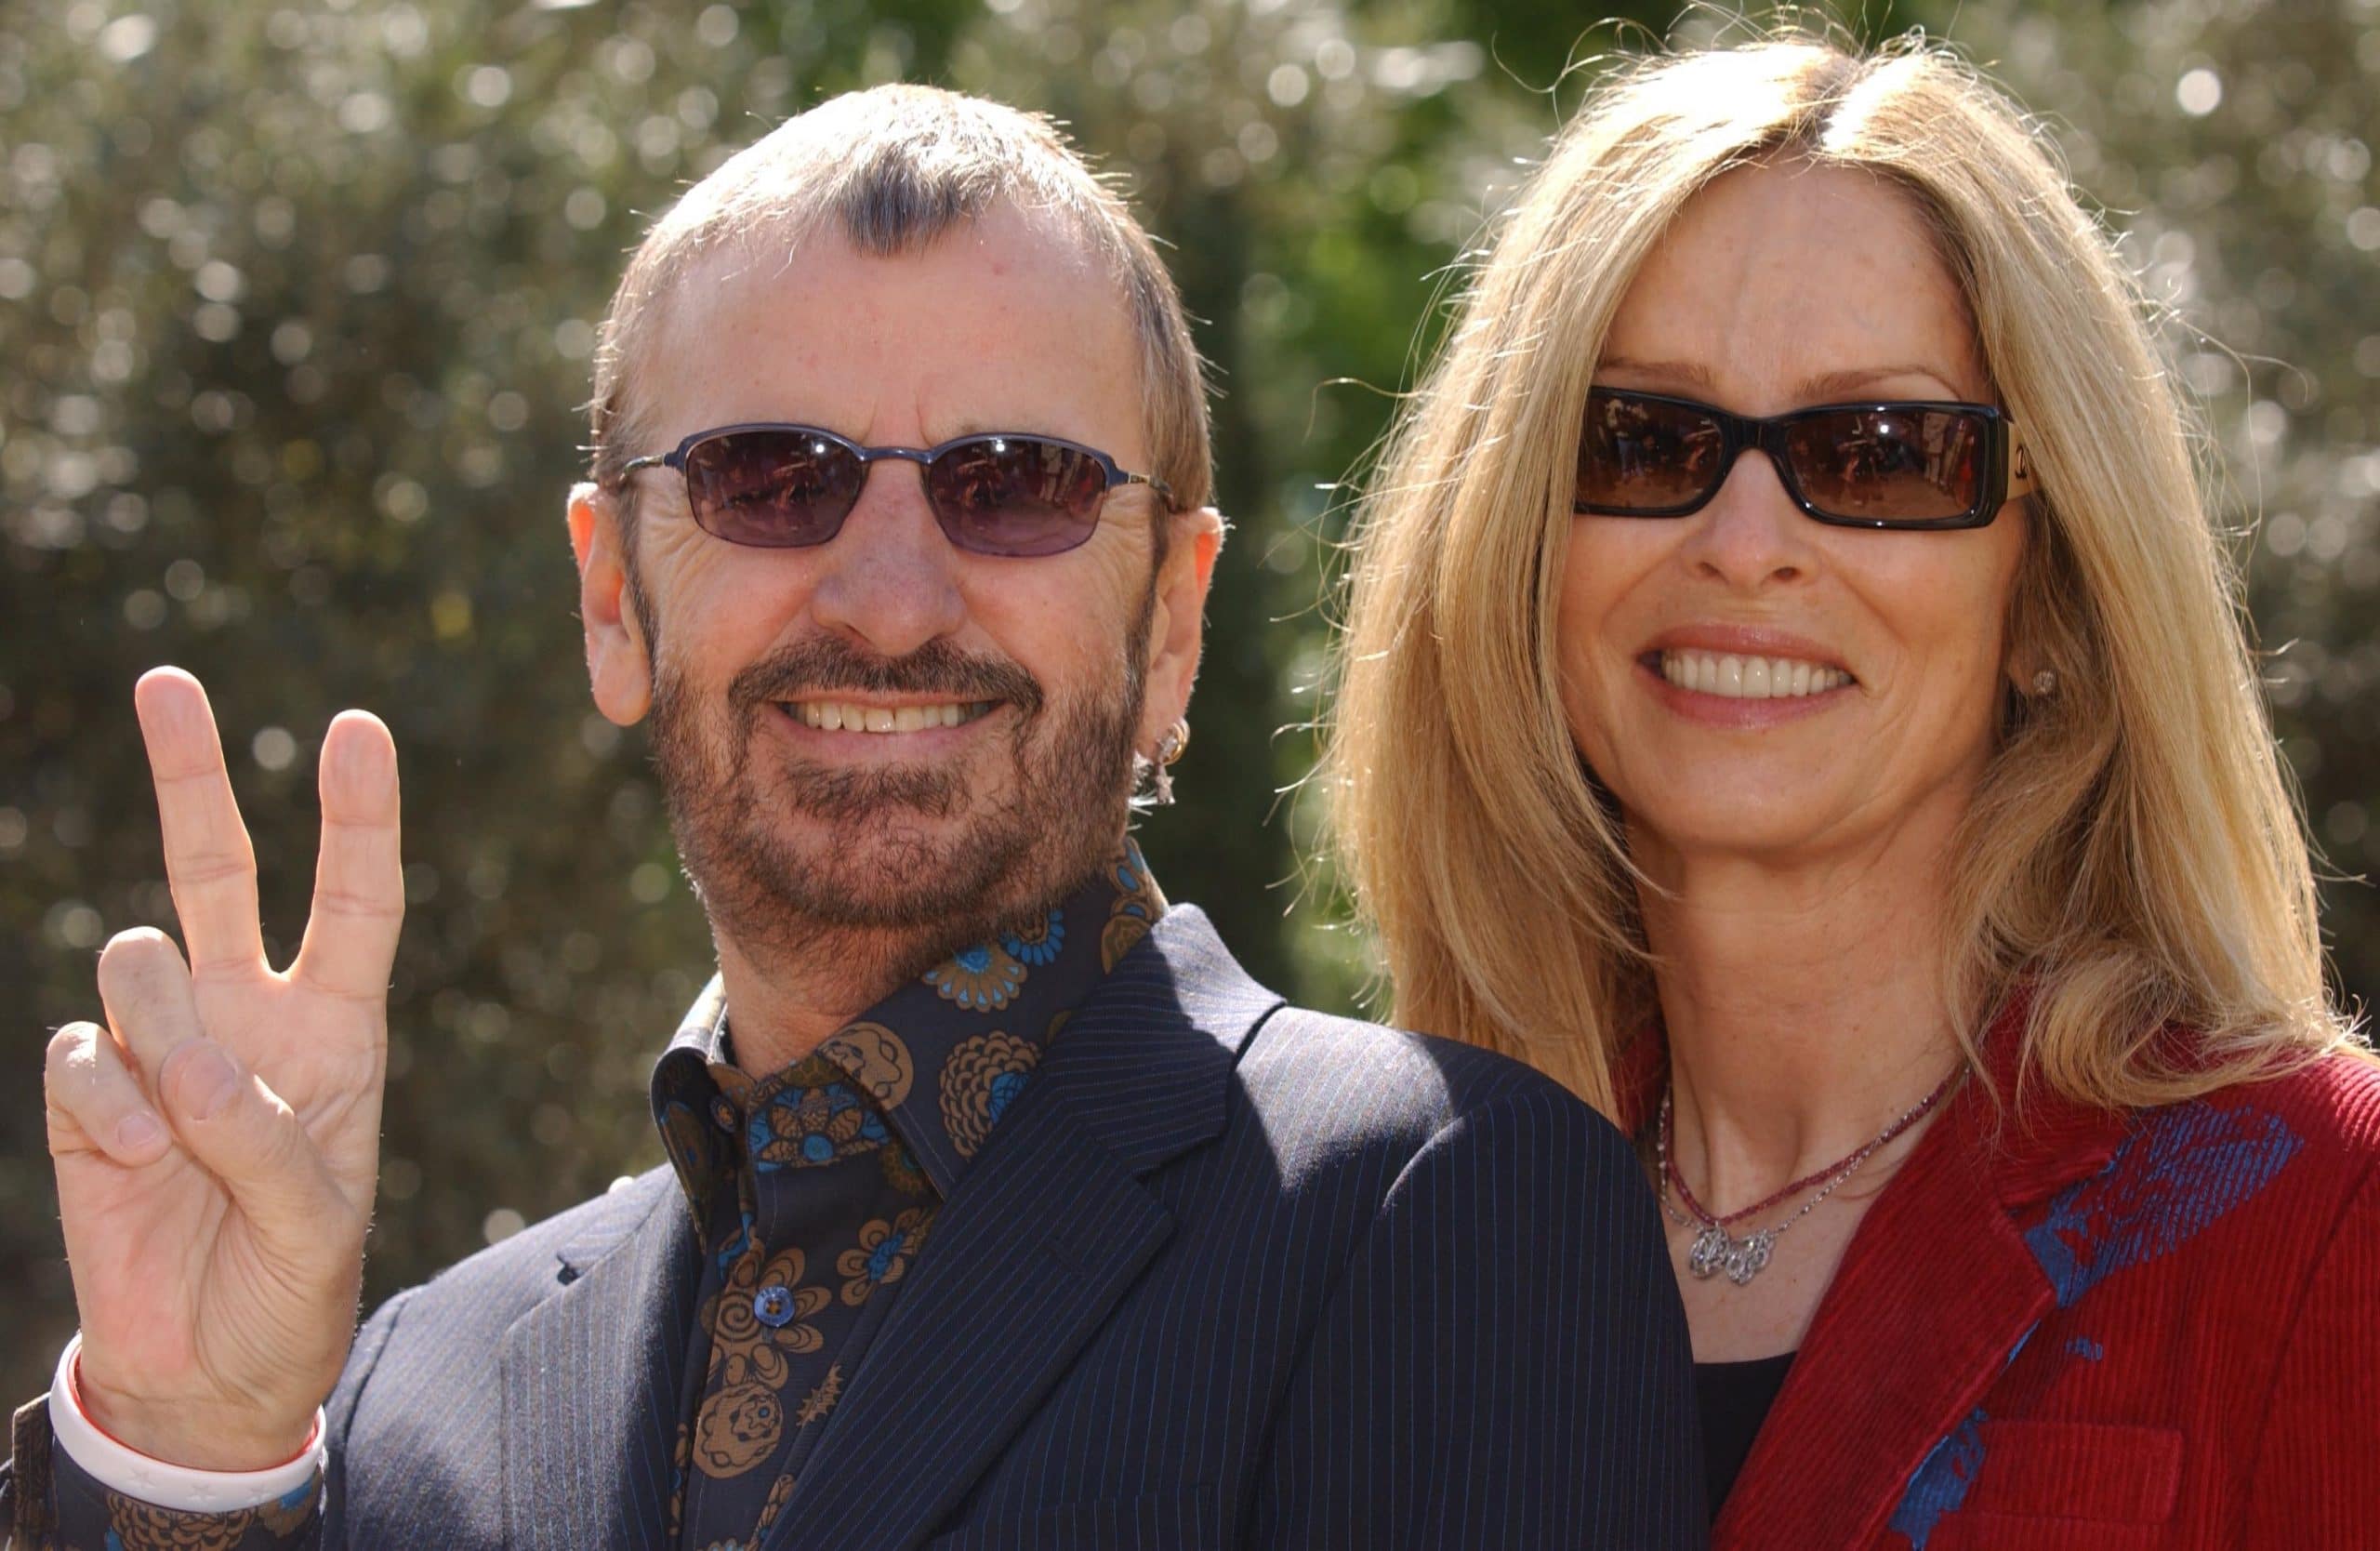 Ringo Starr and Barbara Bach attend the 2005 Chelsea Flower Show in London